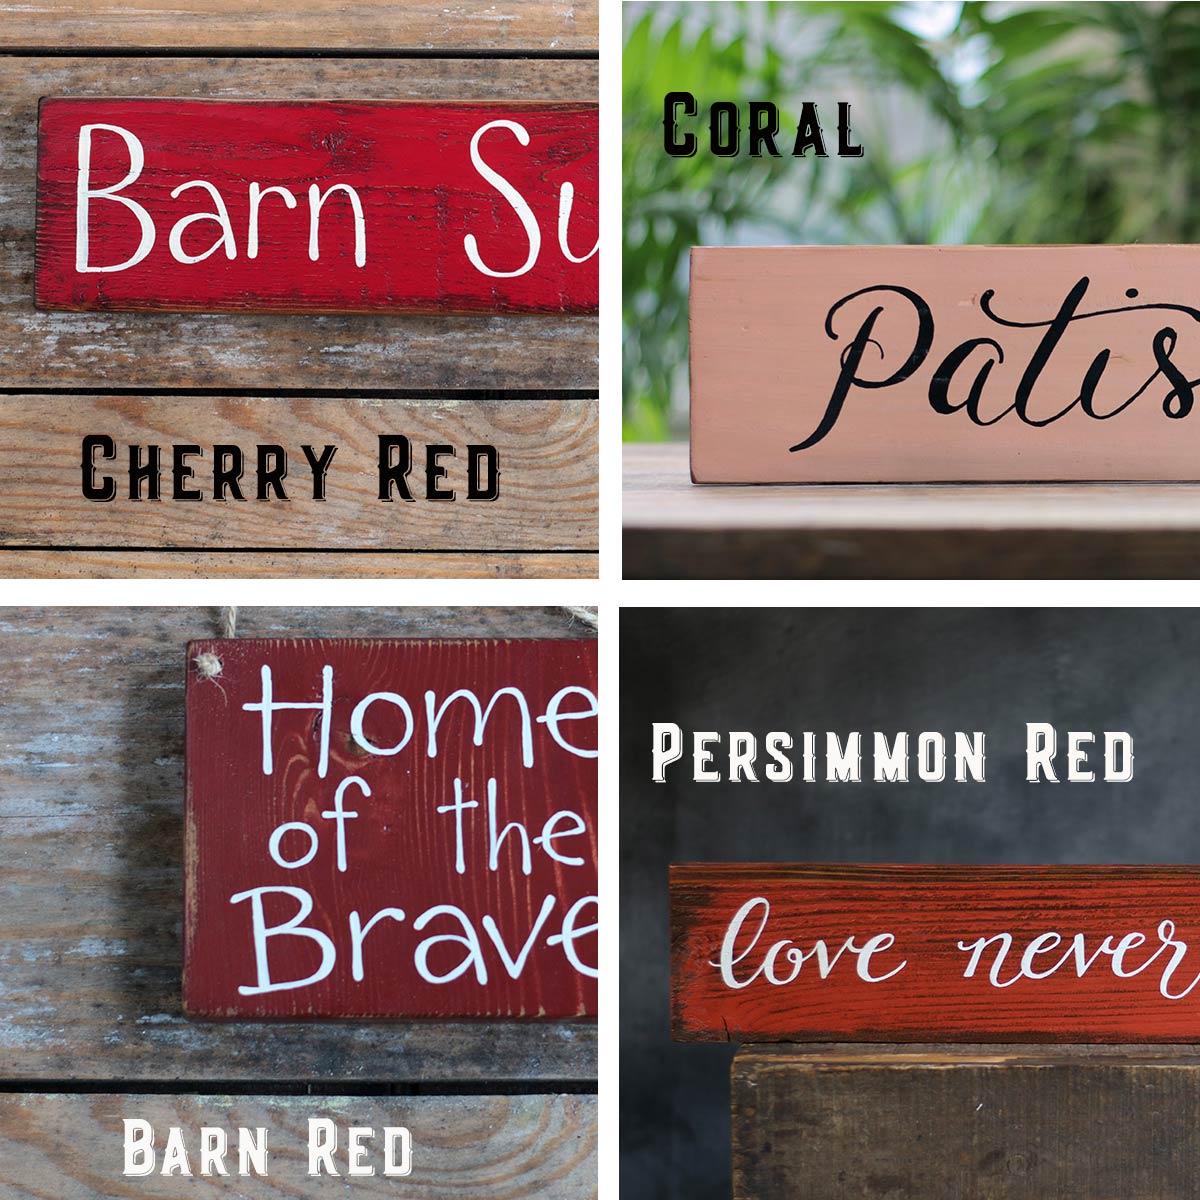 Colors - Cherry, Coral, Barn Red, Persimmon